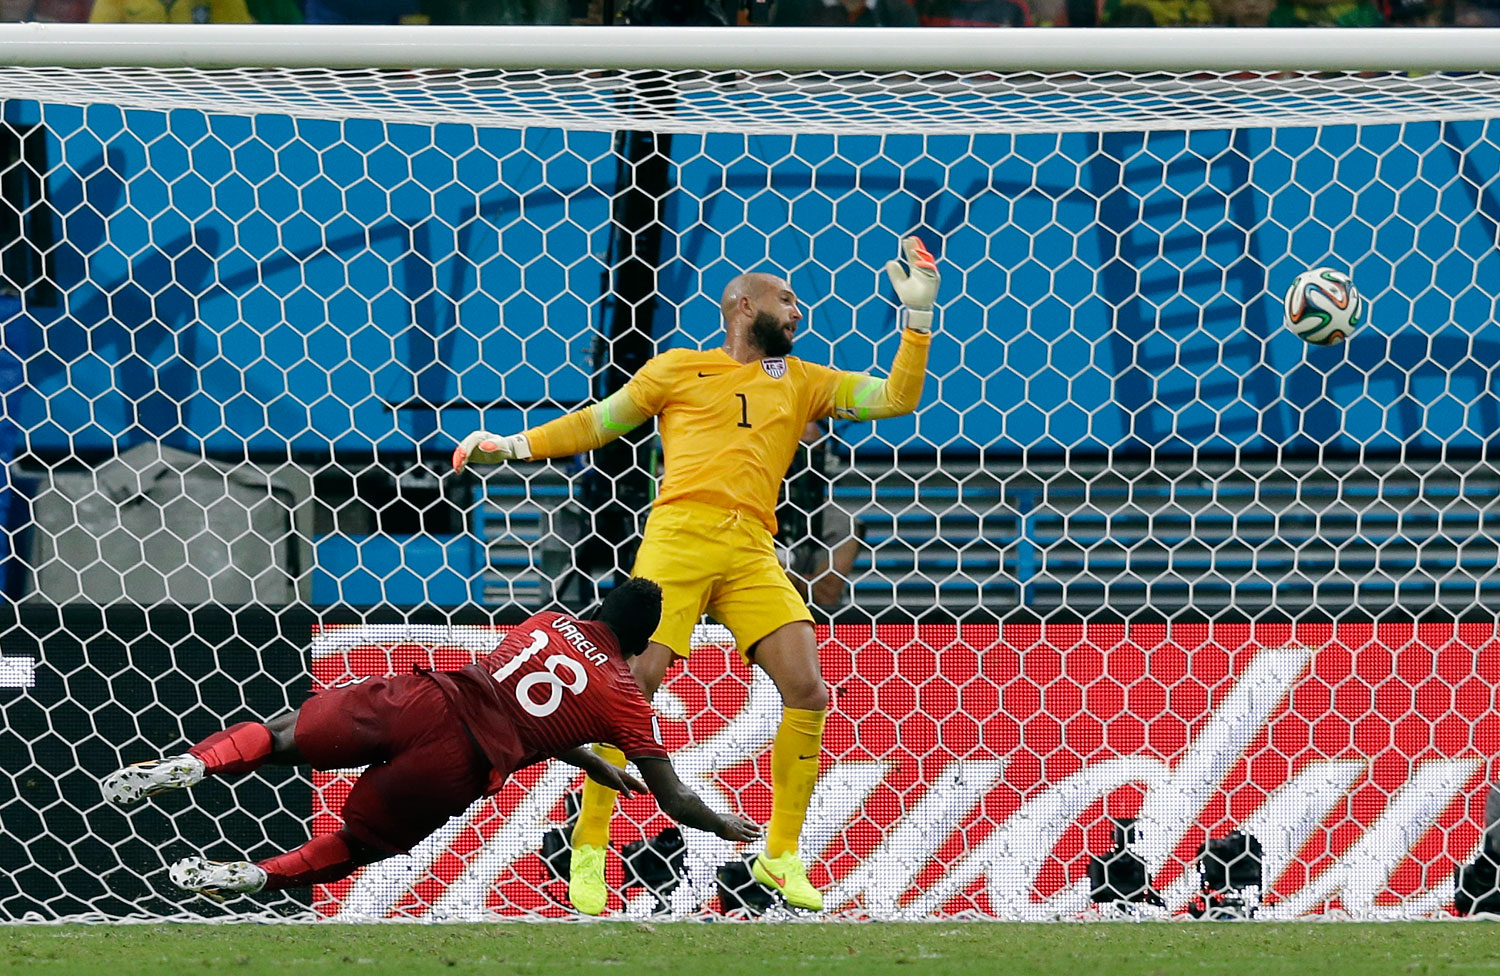 Portugal's Silvestre Varela heads the ball past United States' goalkeeper Tim Howard to score his side's second goal to tie the game 2-2.